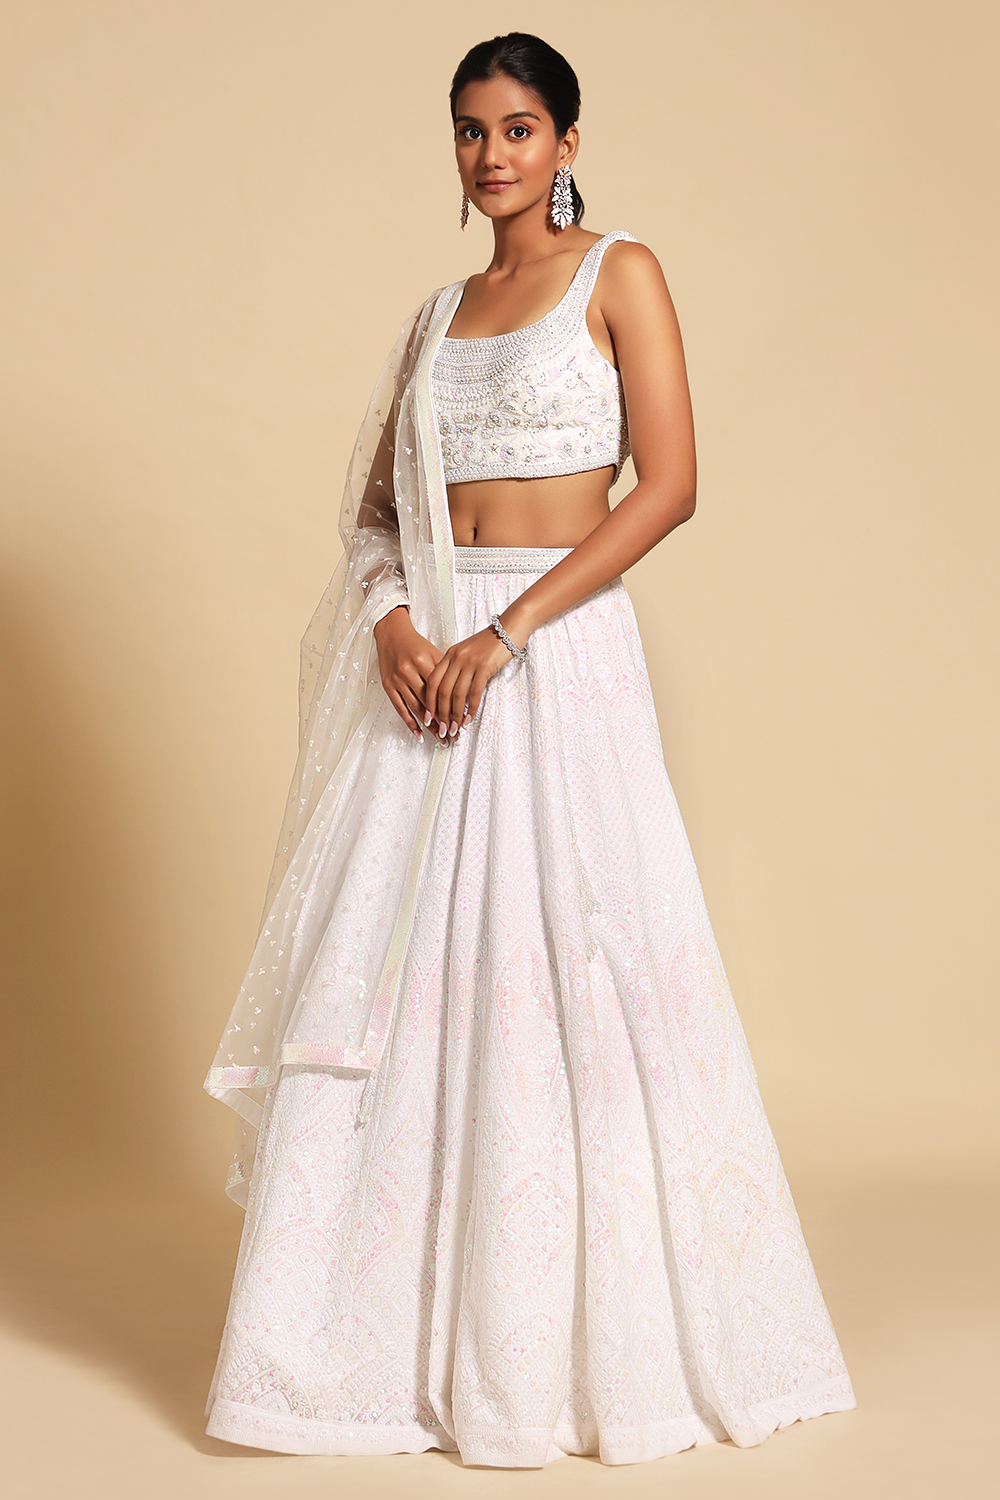 Rooh Silhouettes Georgette Lucknowi Chikankari Lehenga at Rs 145 in Indore